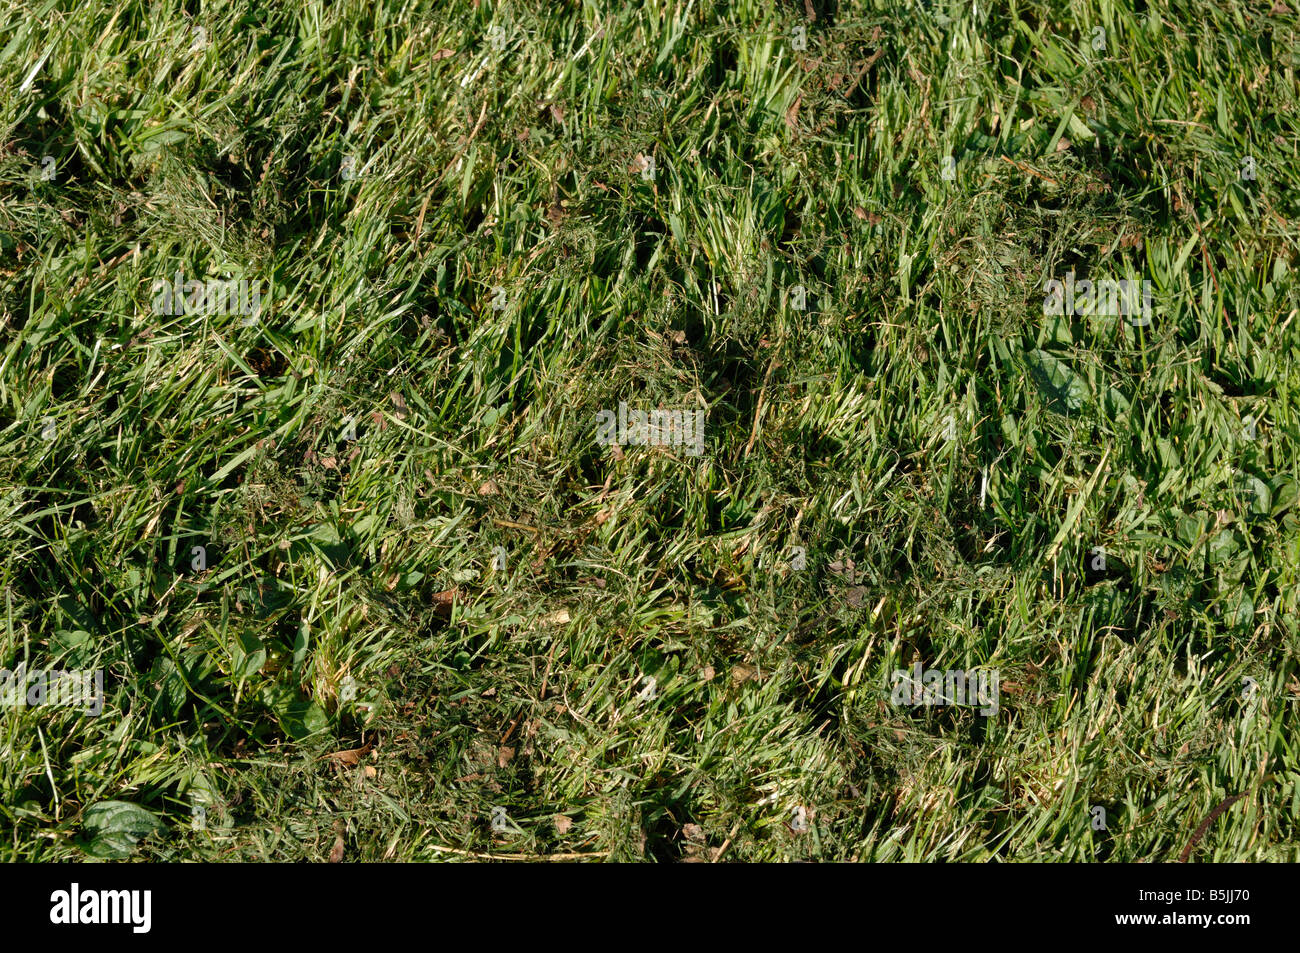 Rough lawn with fine much after mowing with a rotary mulching mower Stock Photo